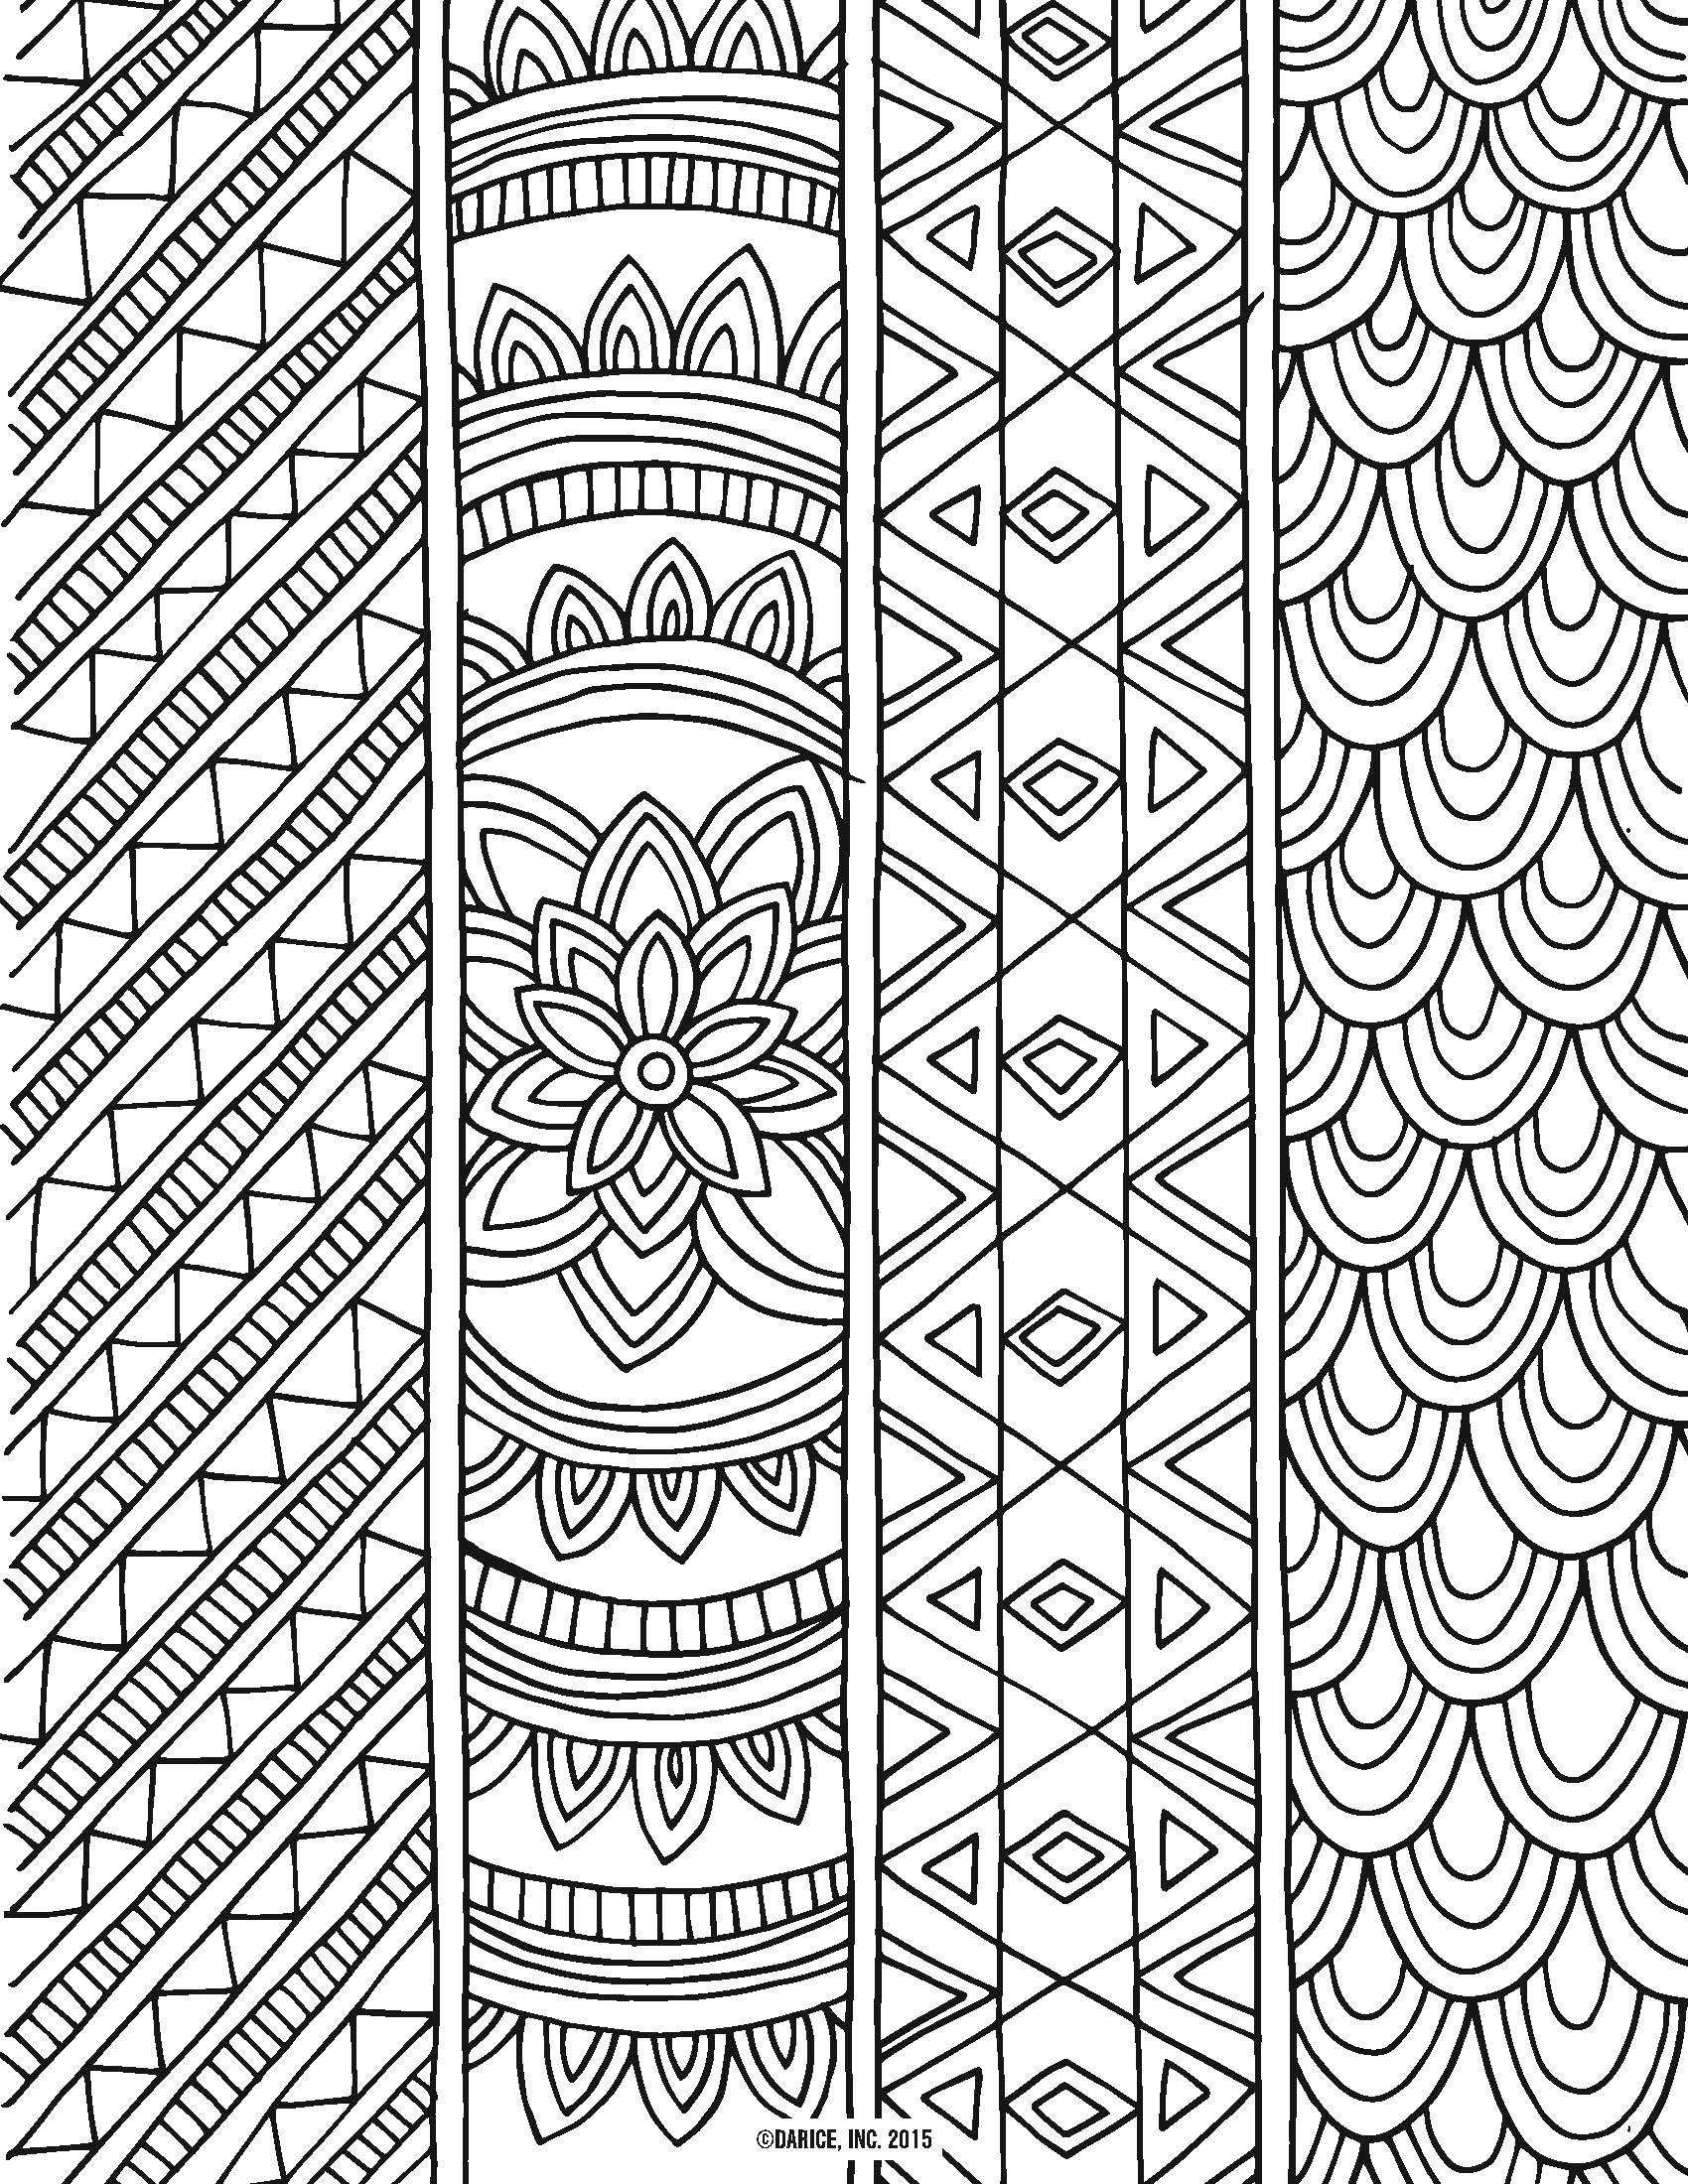 Get Large Print Coloring Books For Adults Pics | Best Coloring Animal